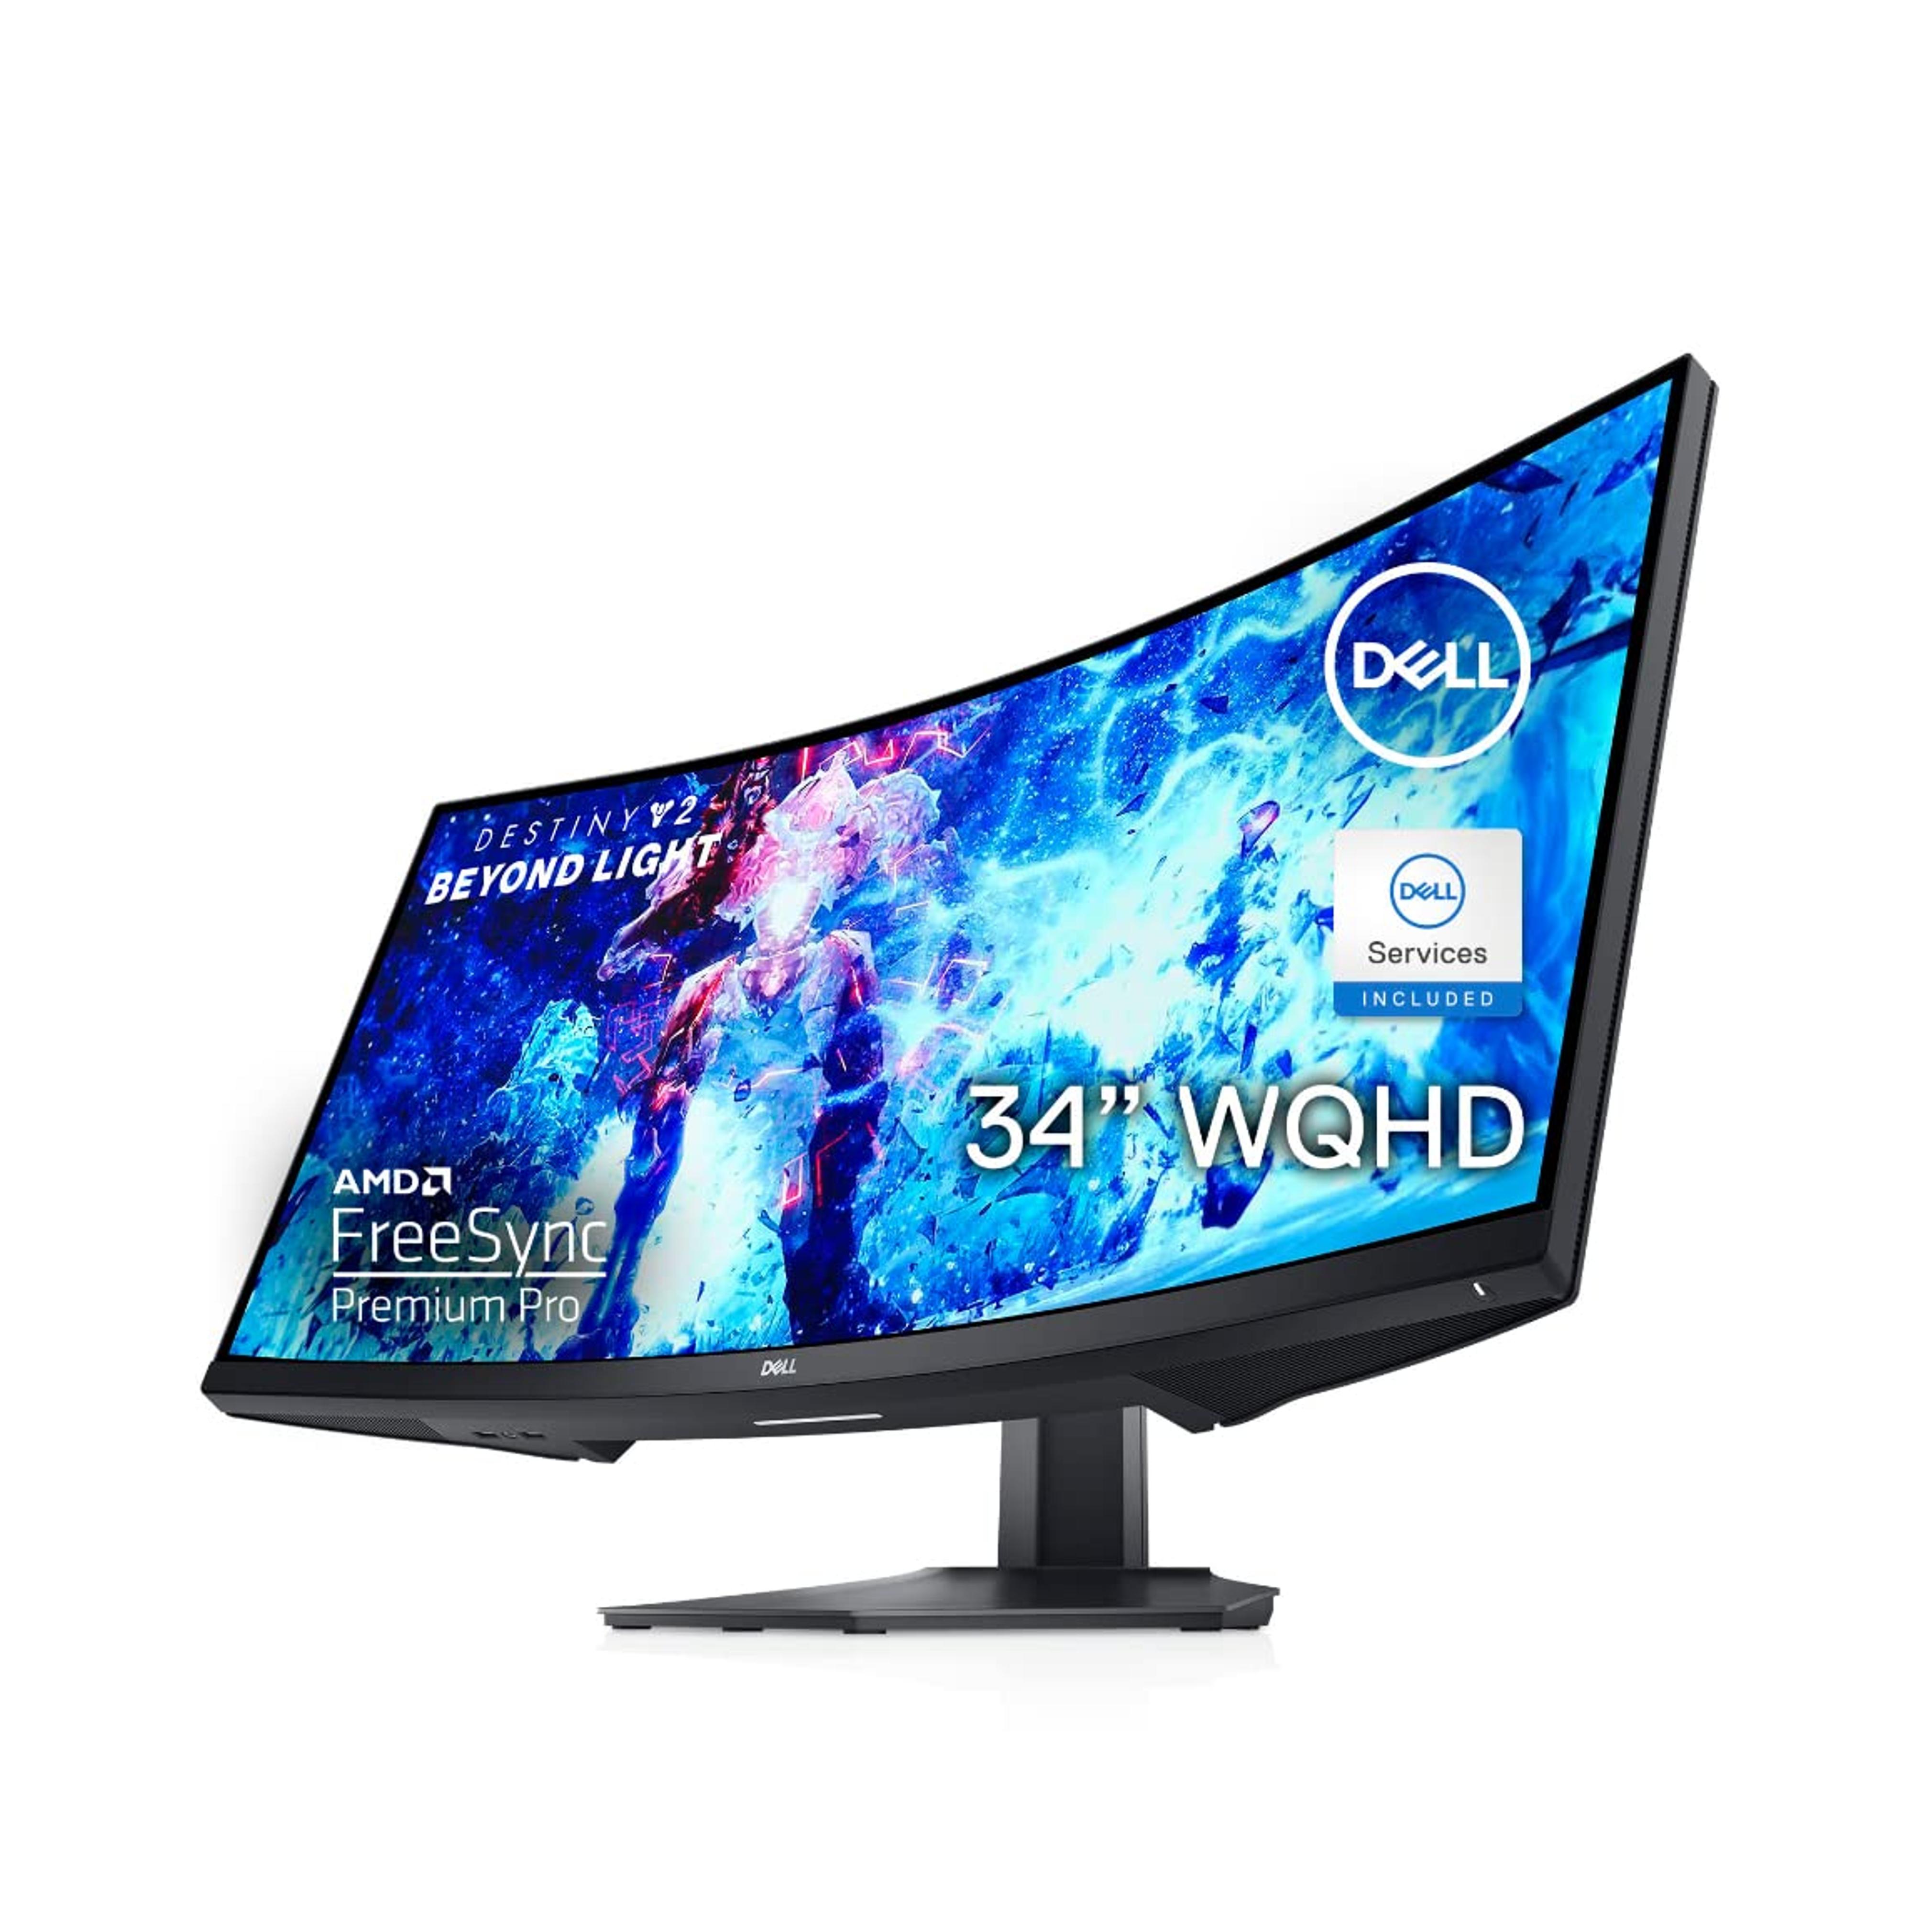 Amazon.com: Dell Curved Gaming Monitor 34 Inch Curved Monitor with 144Hz Refresh Rate, WQHD (3440 x 1440) Display, Black - S3422DWG : Everything Else